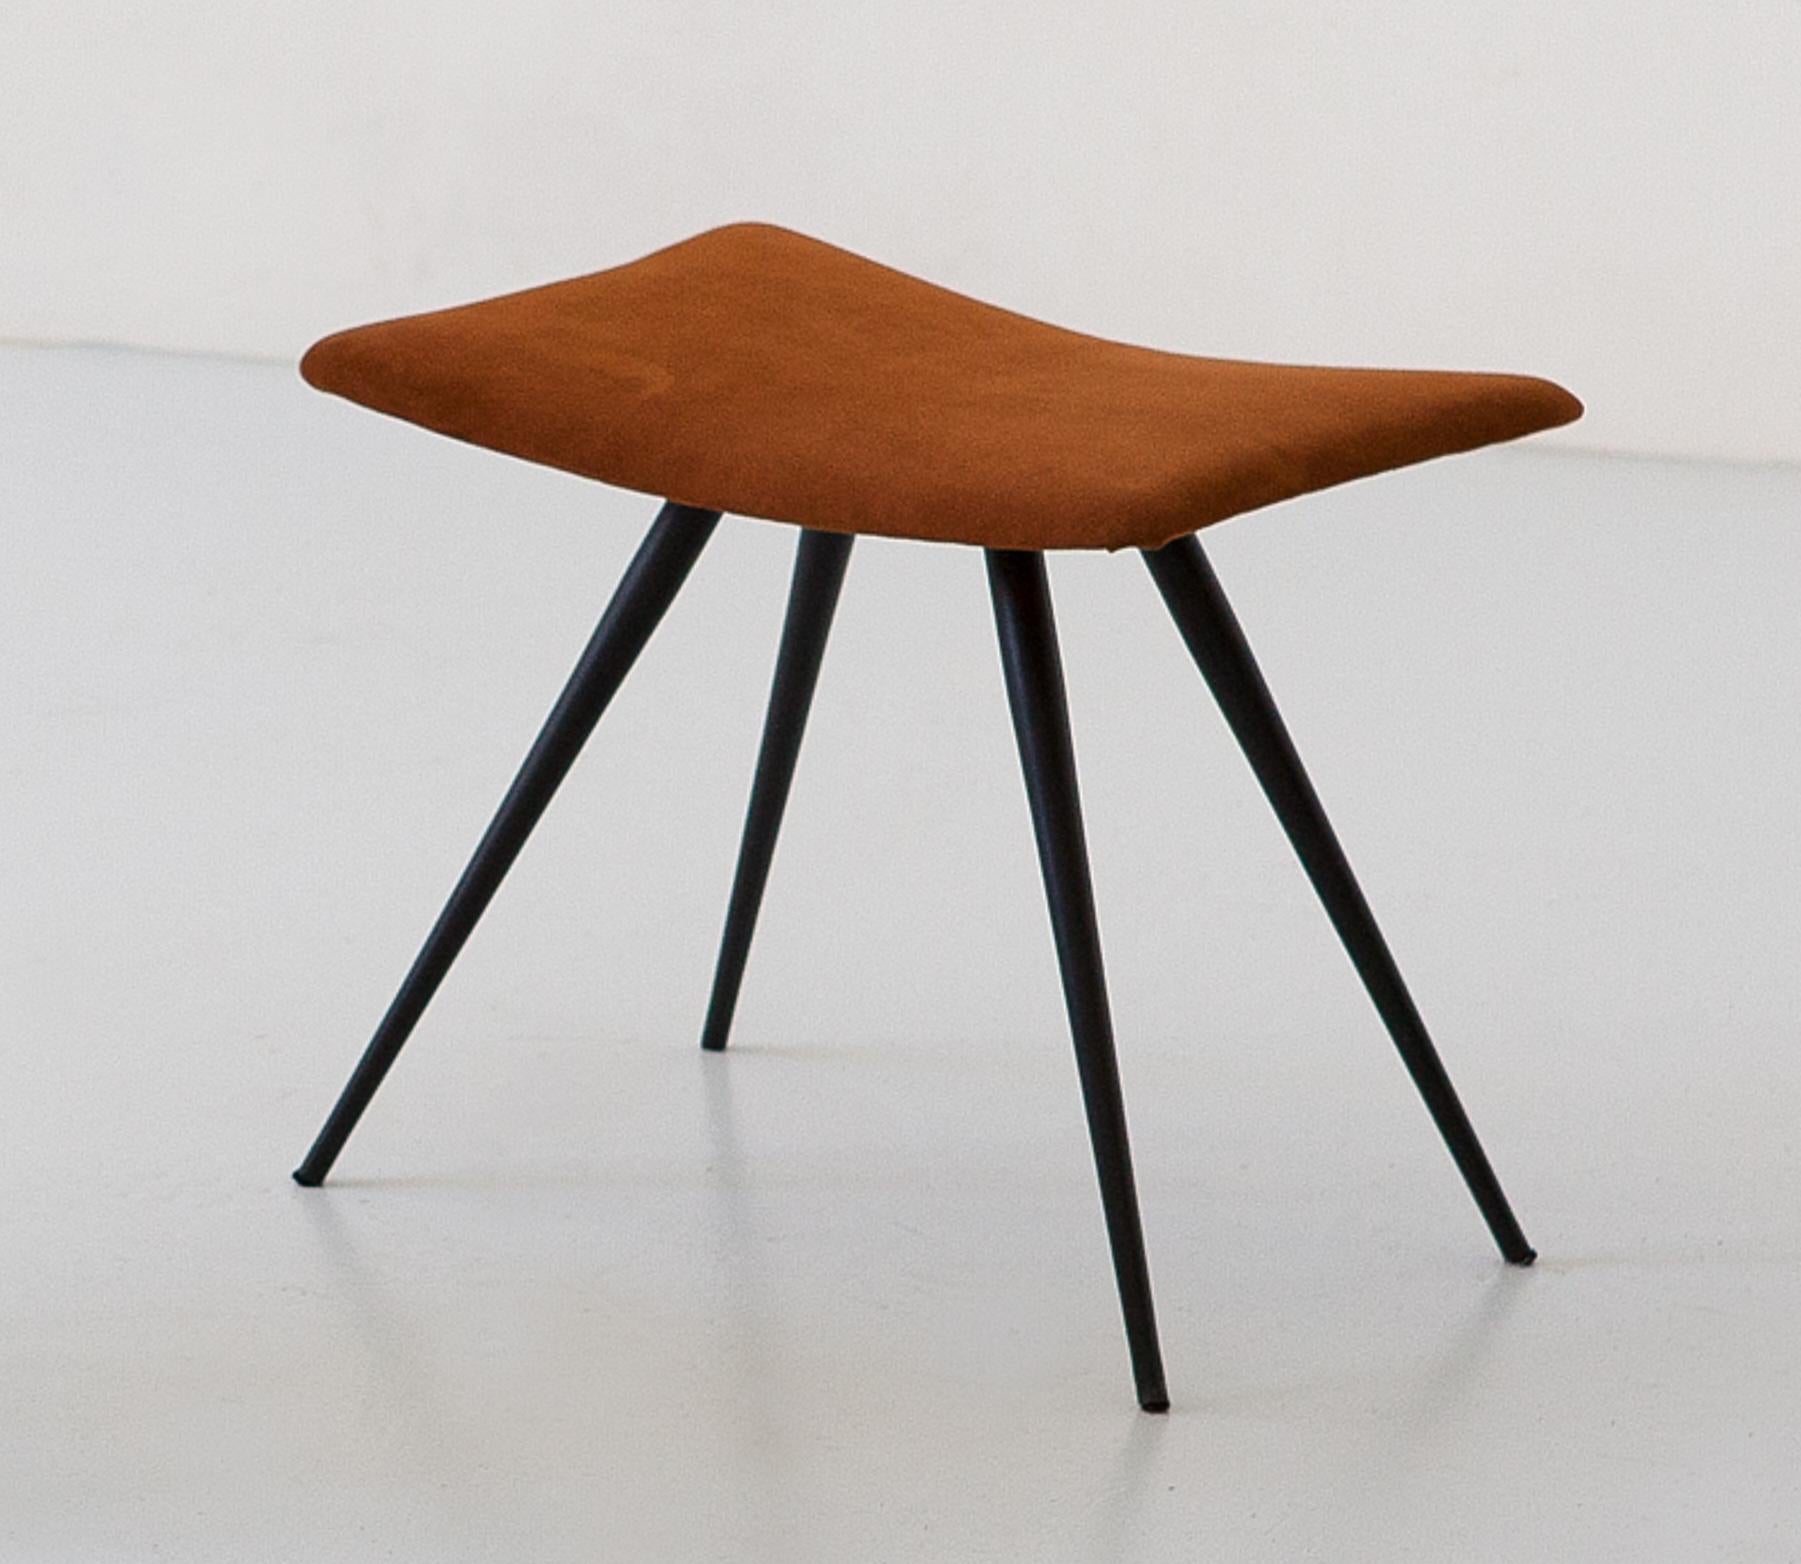 Mid-Century Modern Italian Stool in Cognac Suede Leather and Black Steel Conical Legs, 1950s For Sale